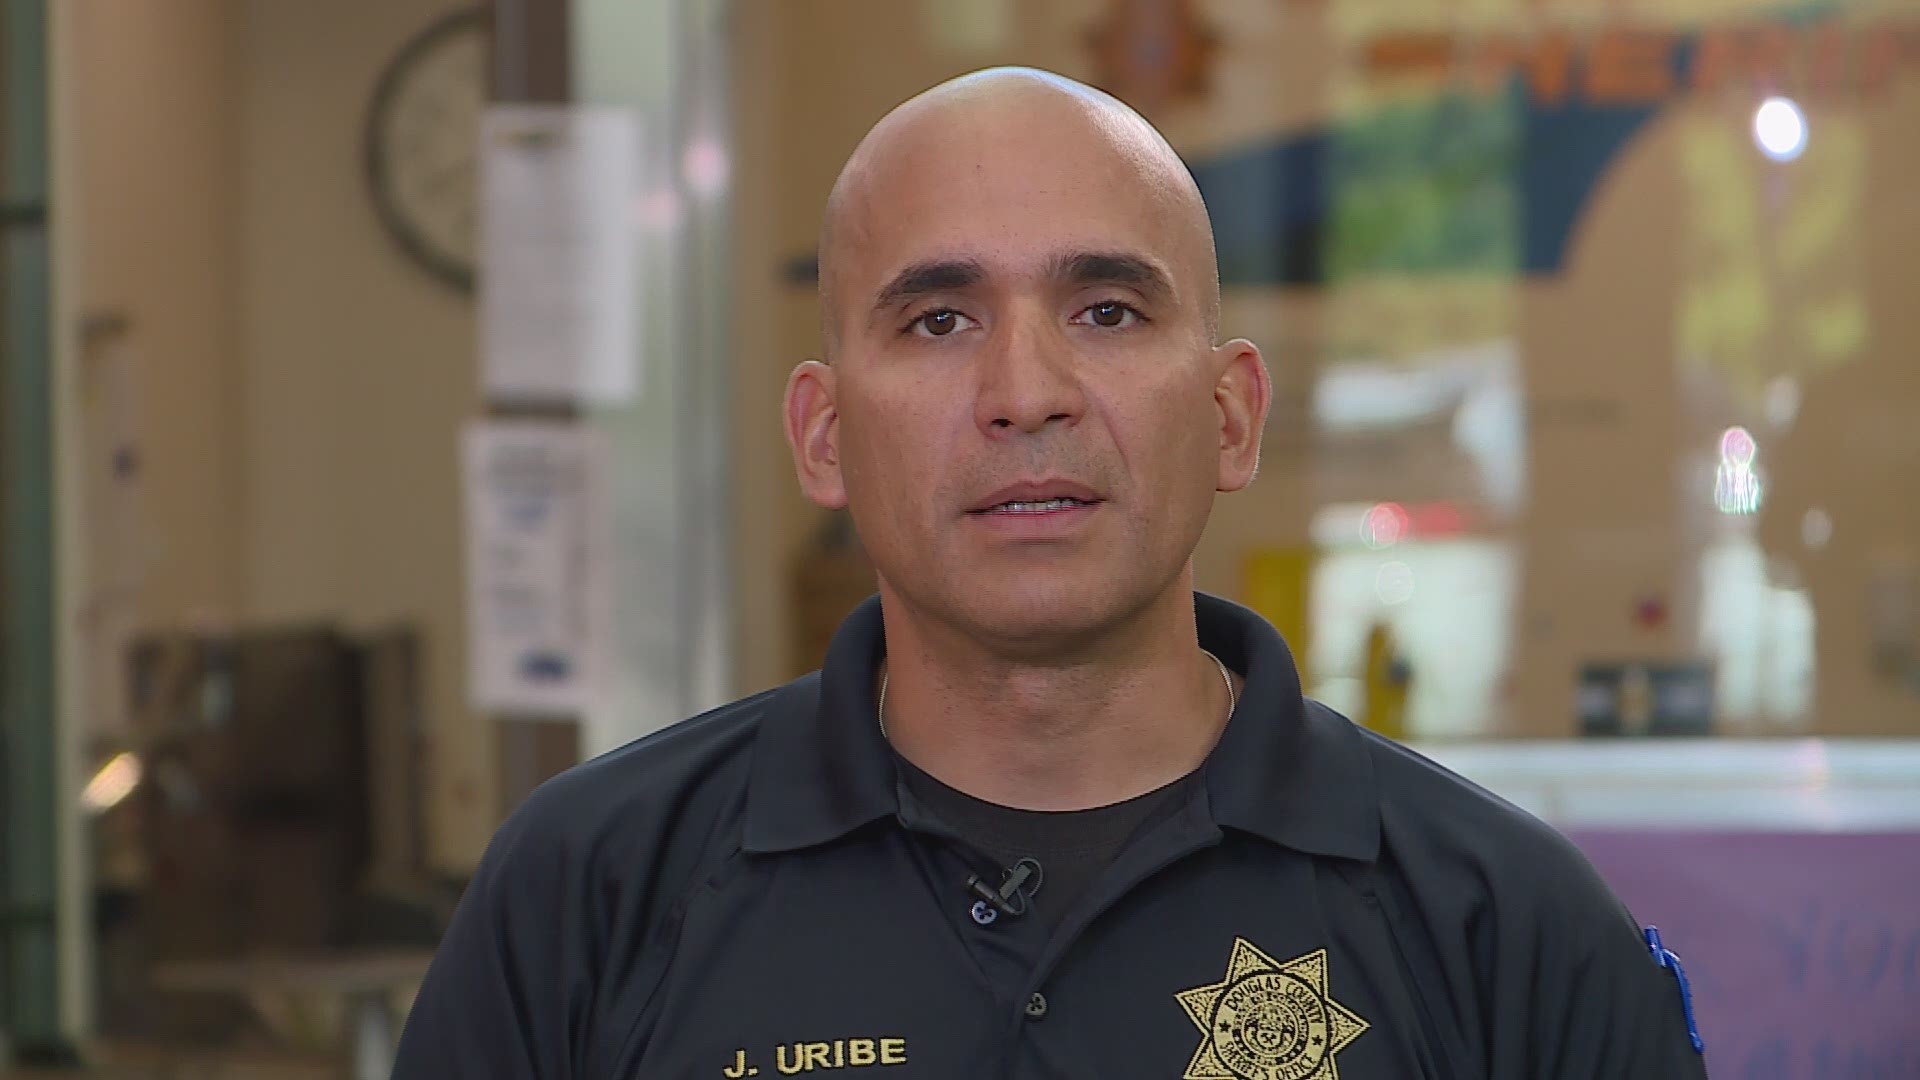 Deputy Uribe spoke exclusively to 9NEWS before his first day on-duty Wednesday.